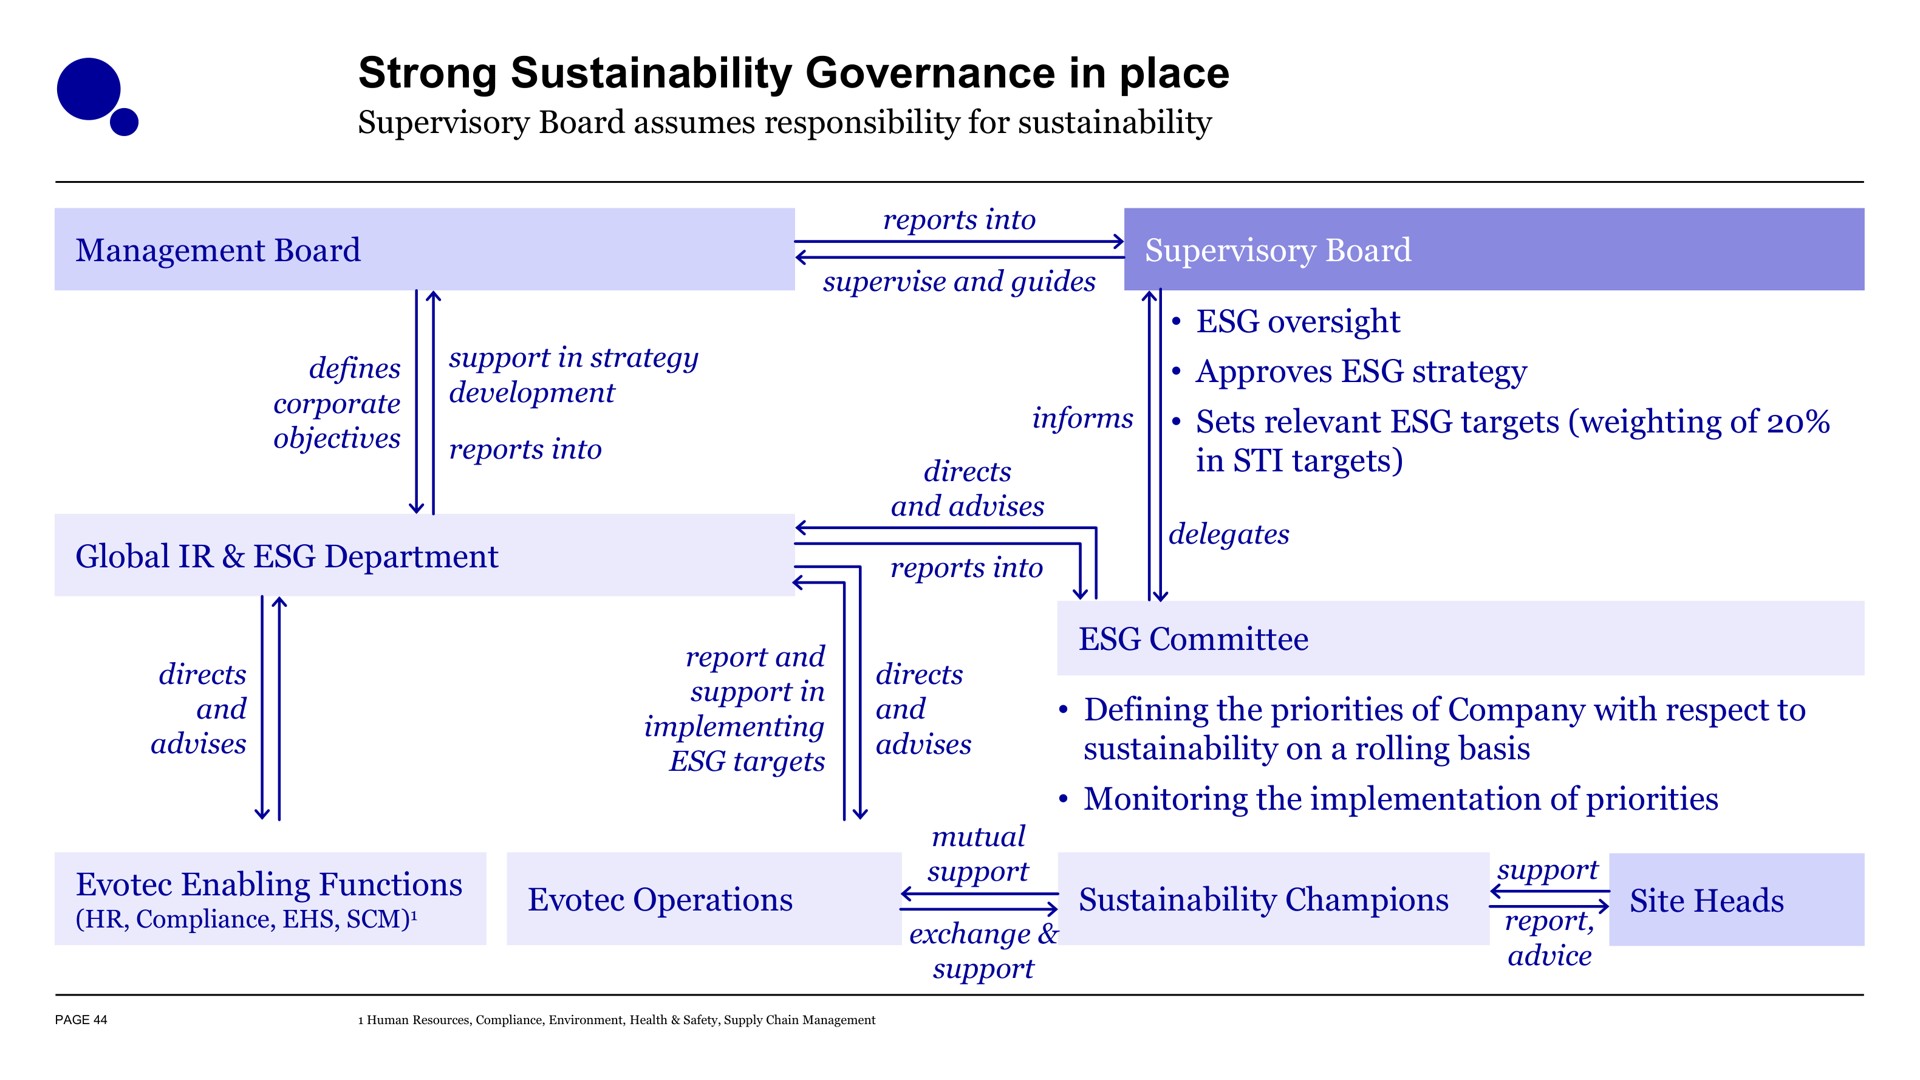 strong governance in place defines support strategy approves strategy | Evotec